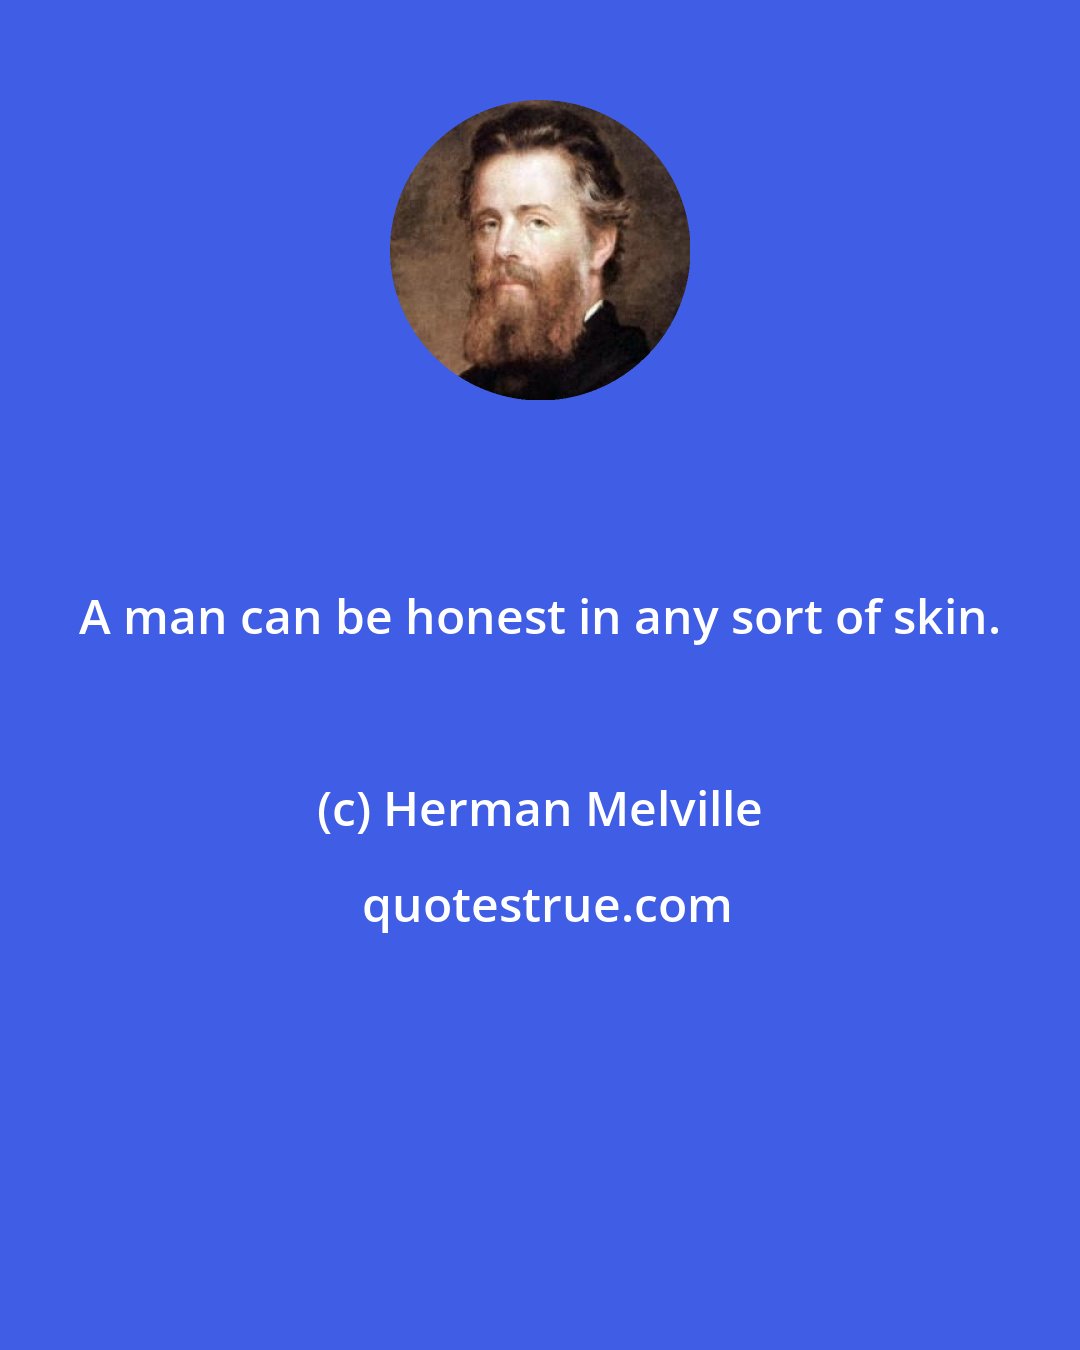 Herman Melville: A man can be honest in any sort of skin.